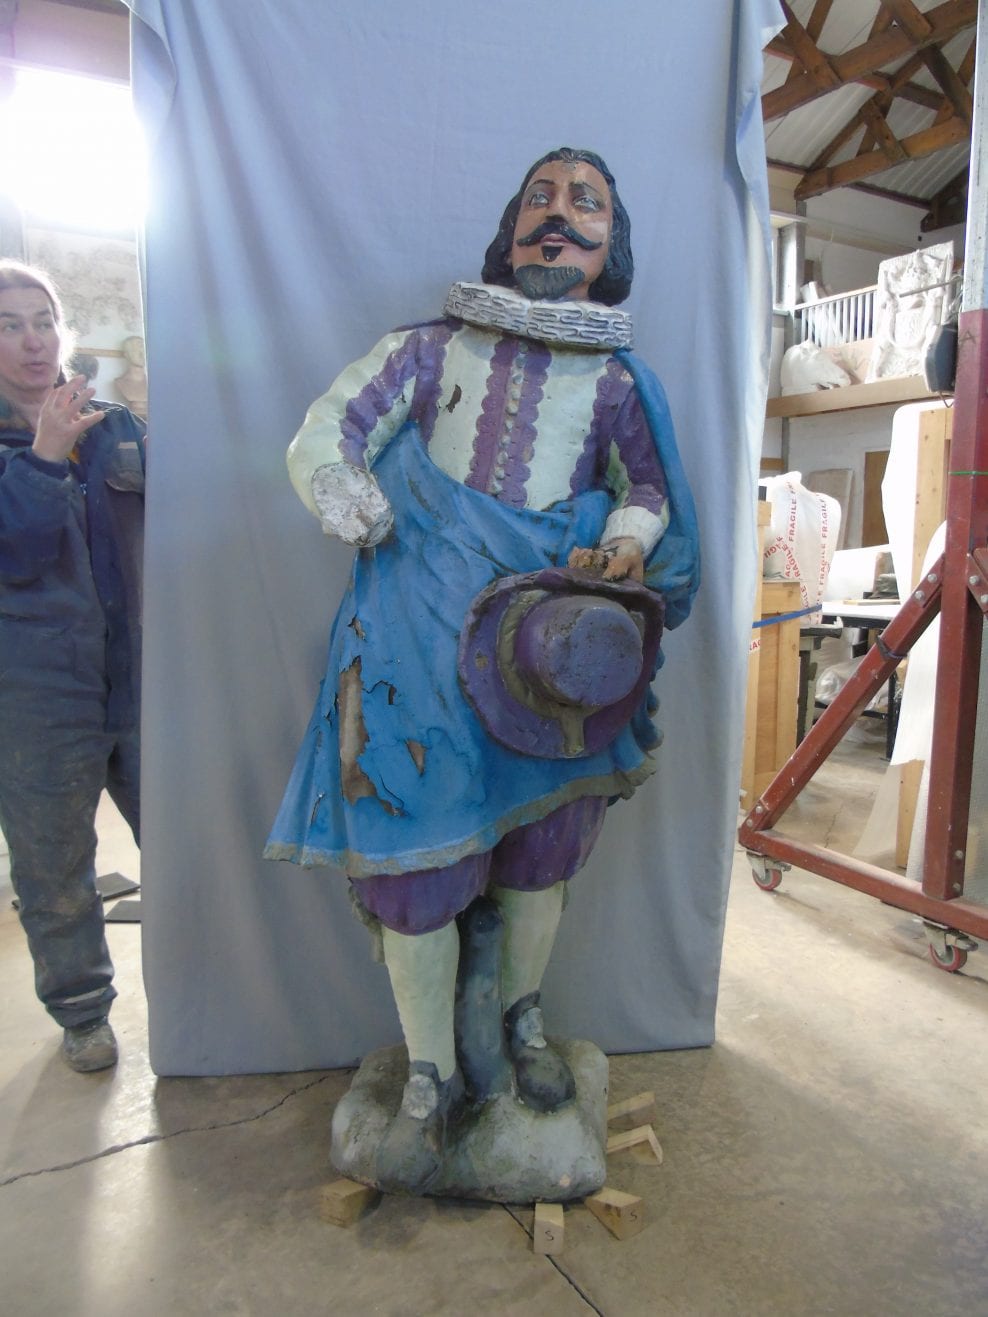 Inital workshop inspection of surface polychromy found on statue of John Cowane statue in February 2019